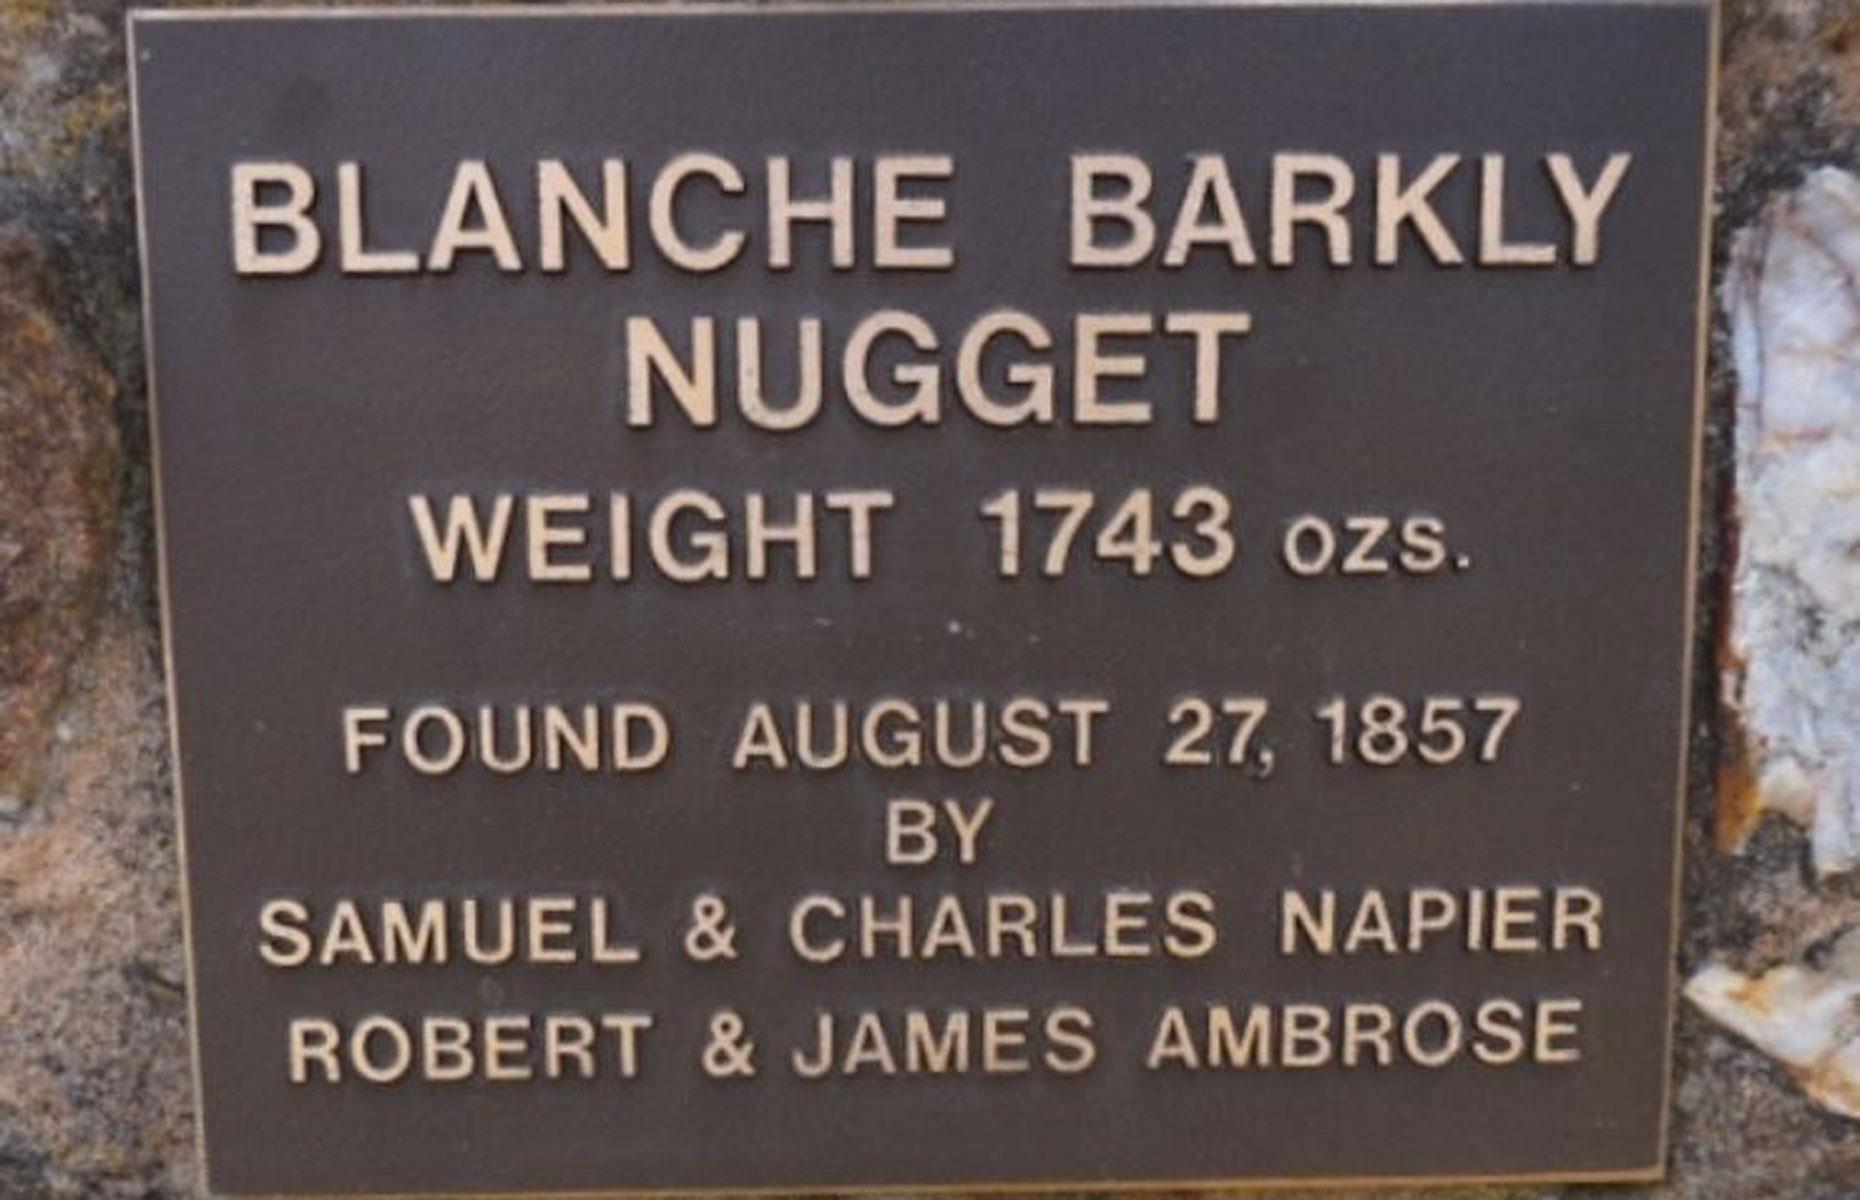 Blanche Barkly Nugget: 1,743 ounces (49.4kg)